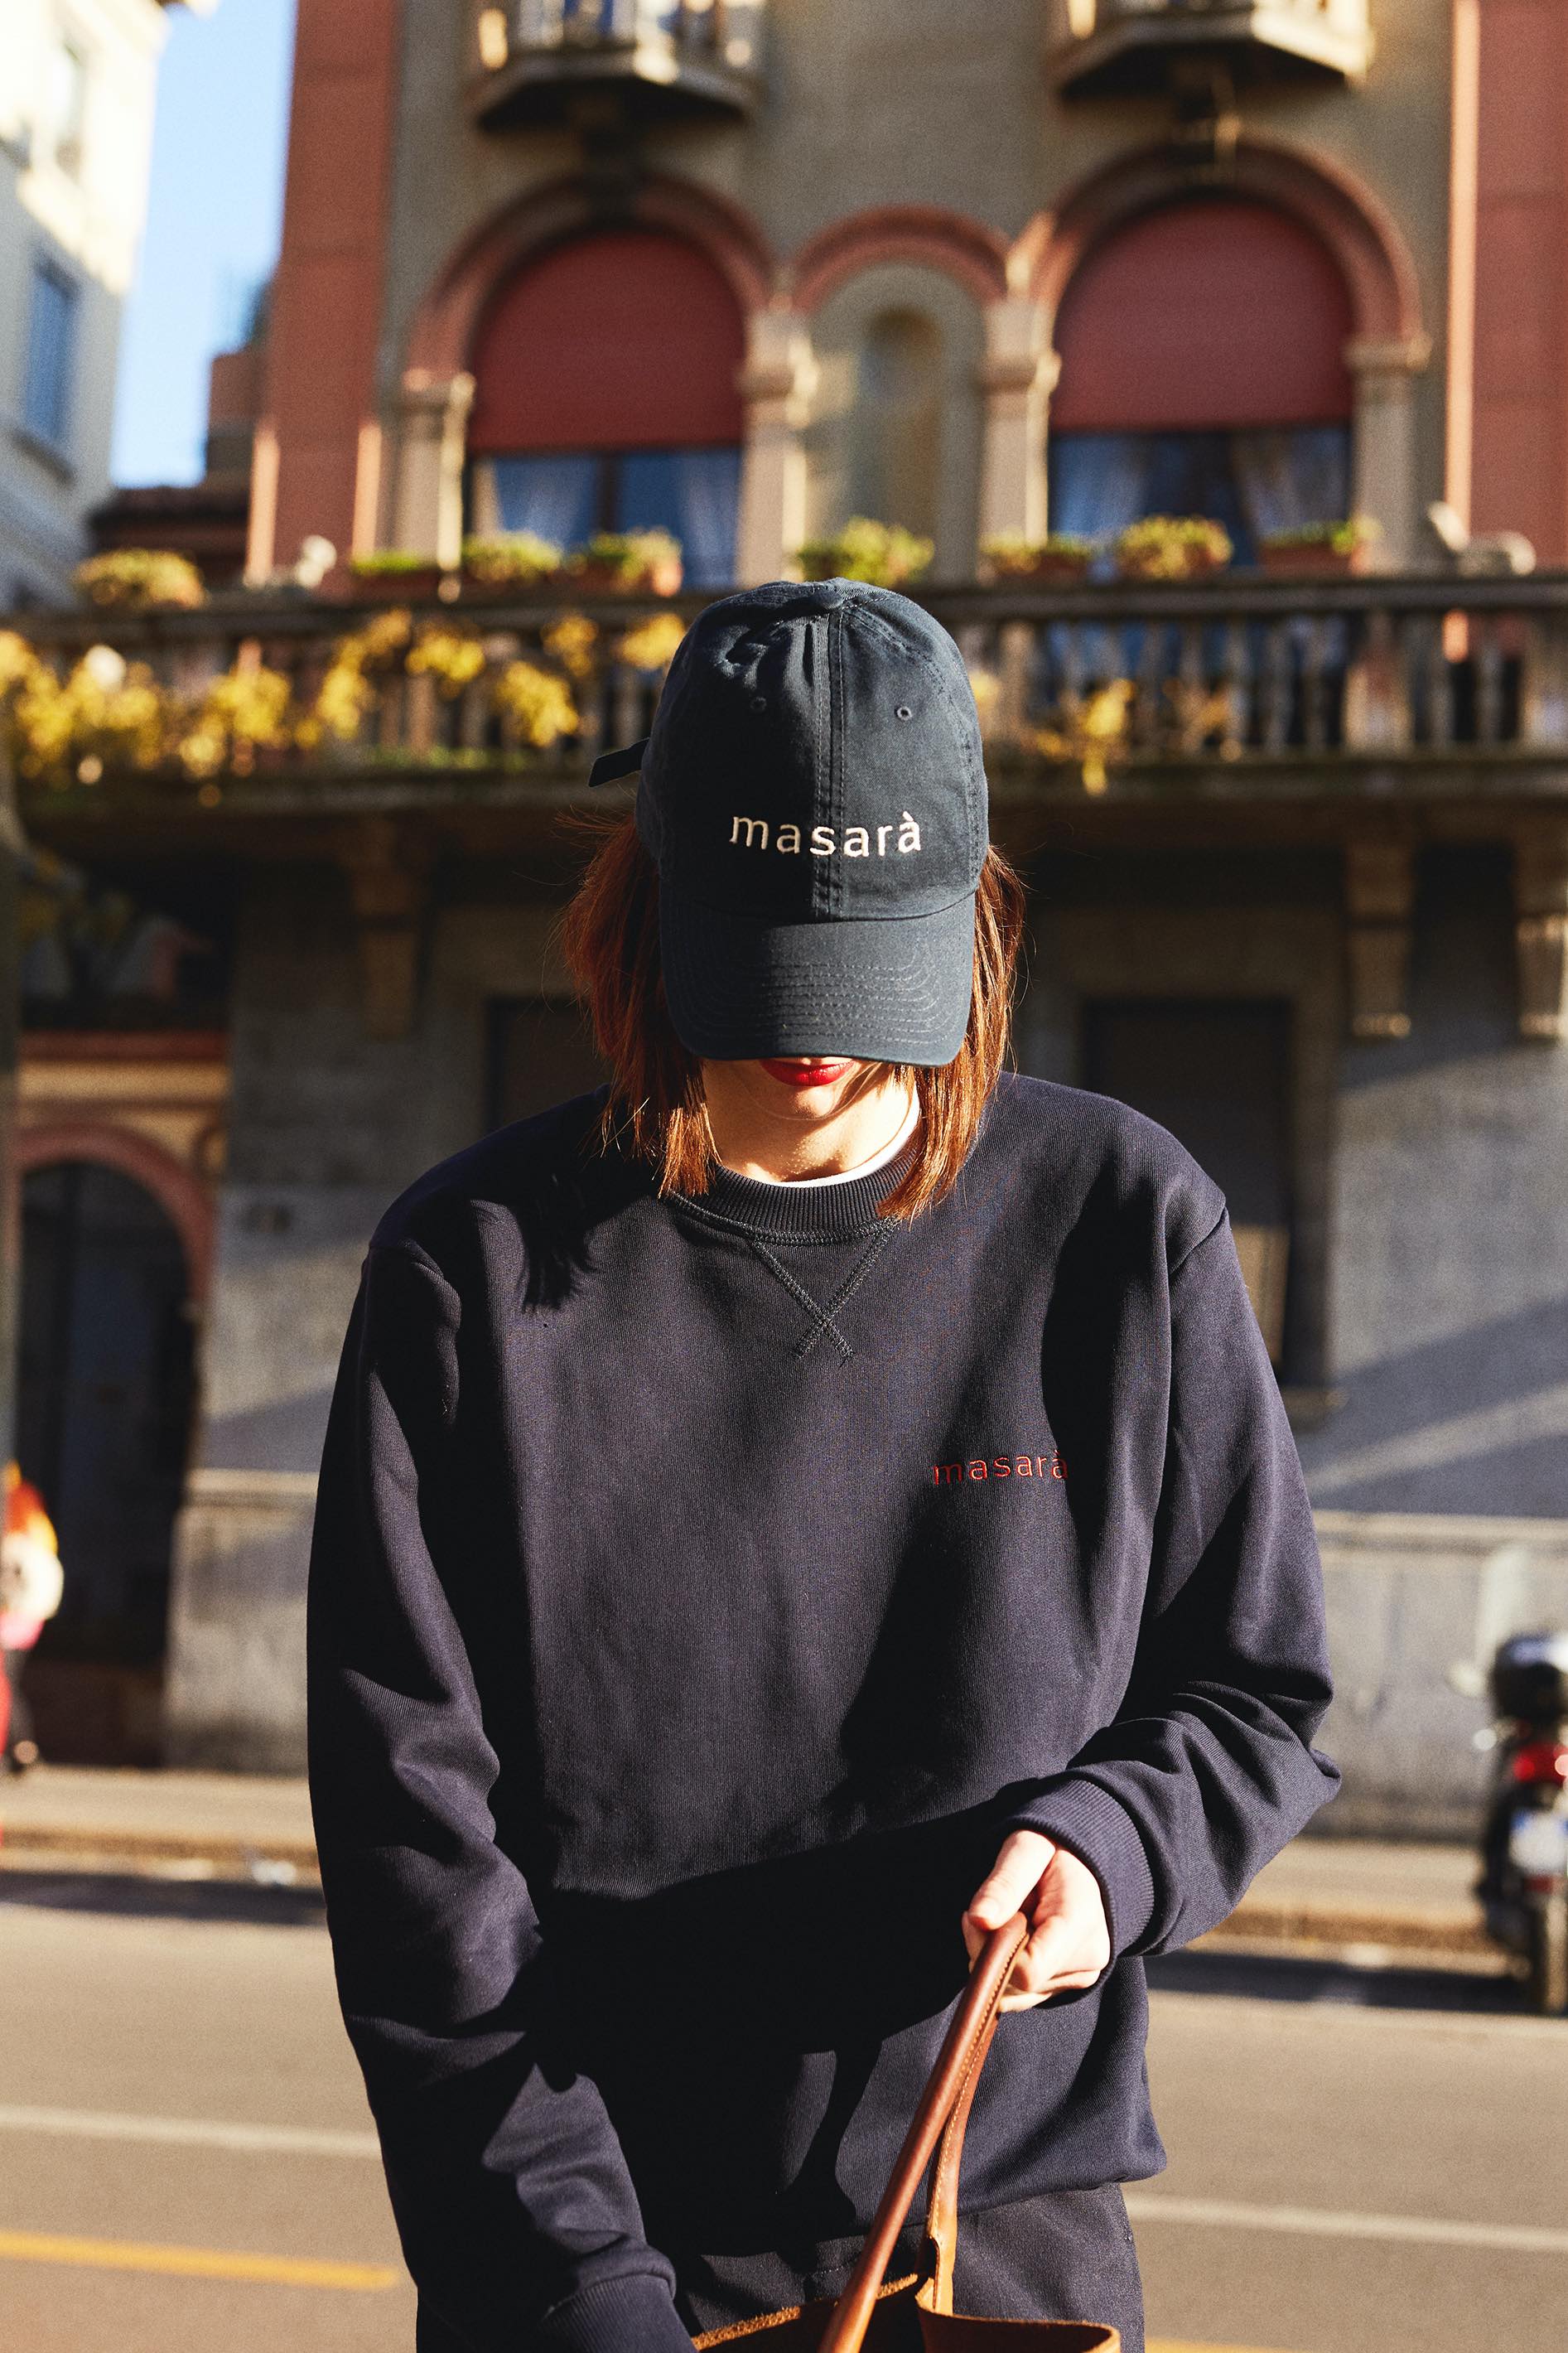 Girl on the street looking inside her bag and wearing masara navy blue dad hat and sweatshirt